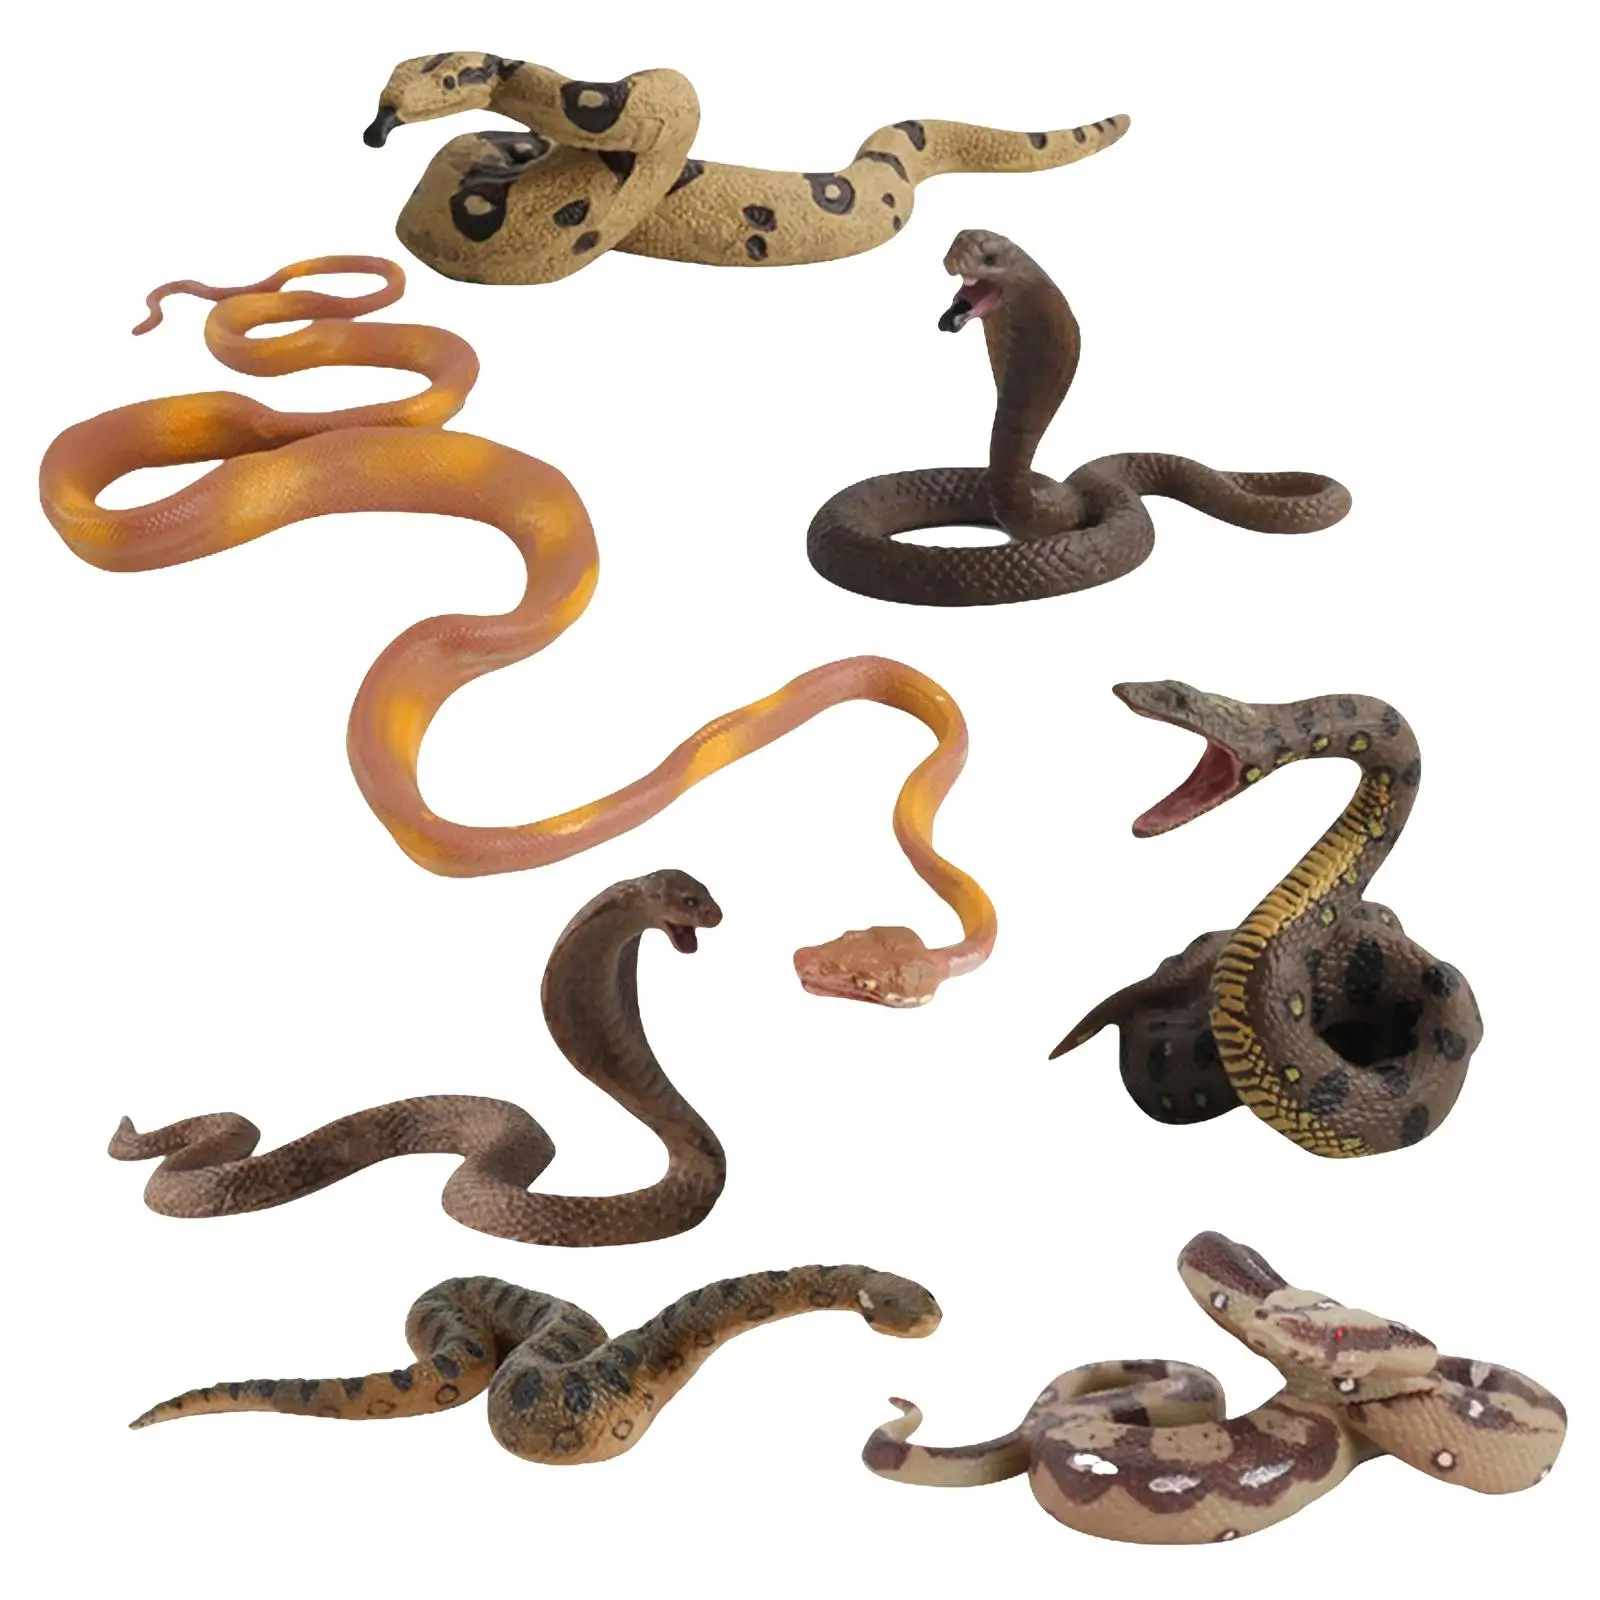 Simulation Snake Model Toy Wildlife Animal for Party Tricks Tabletop